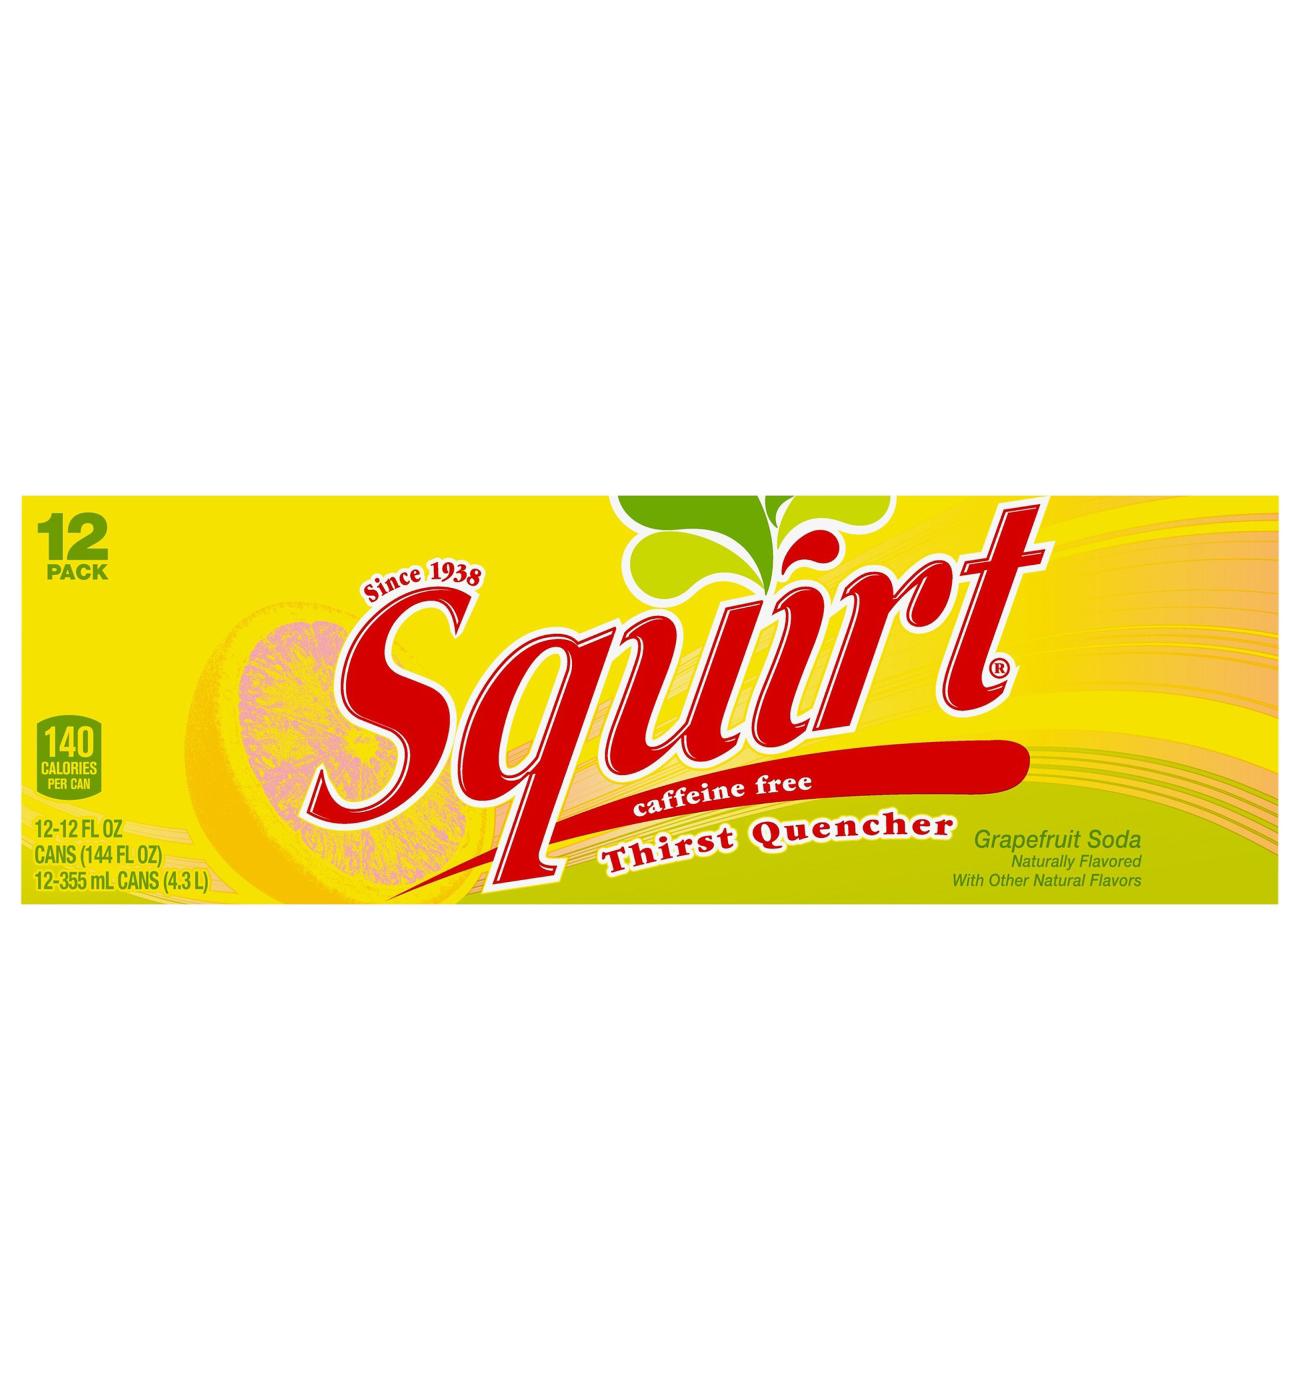 Squirt Grapefruit Soda 12 pk Cans; image 2 of 3